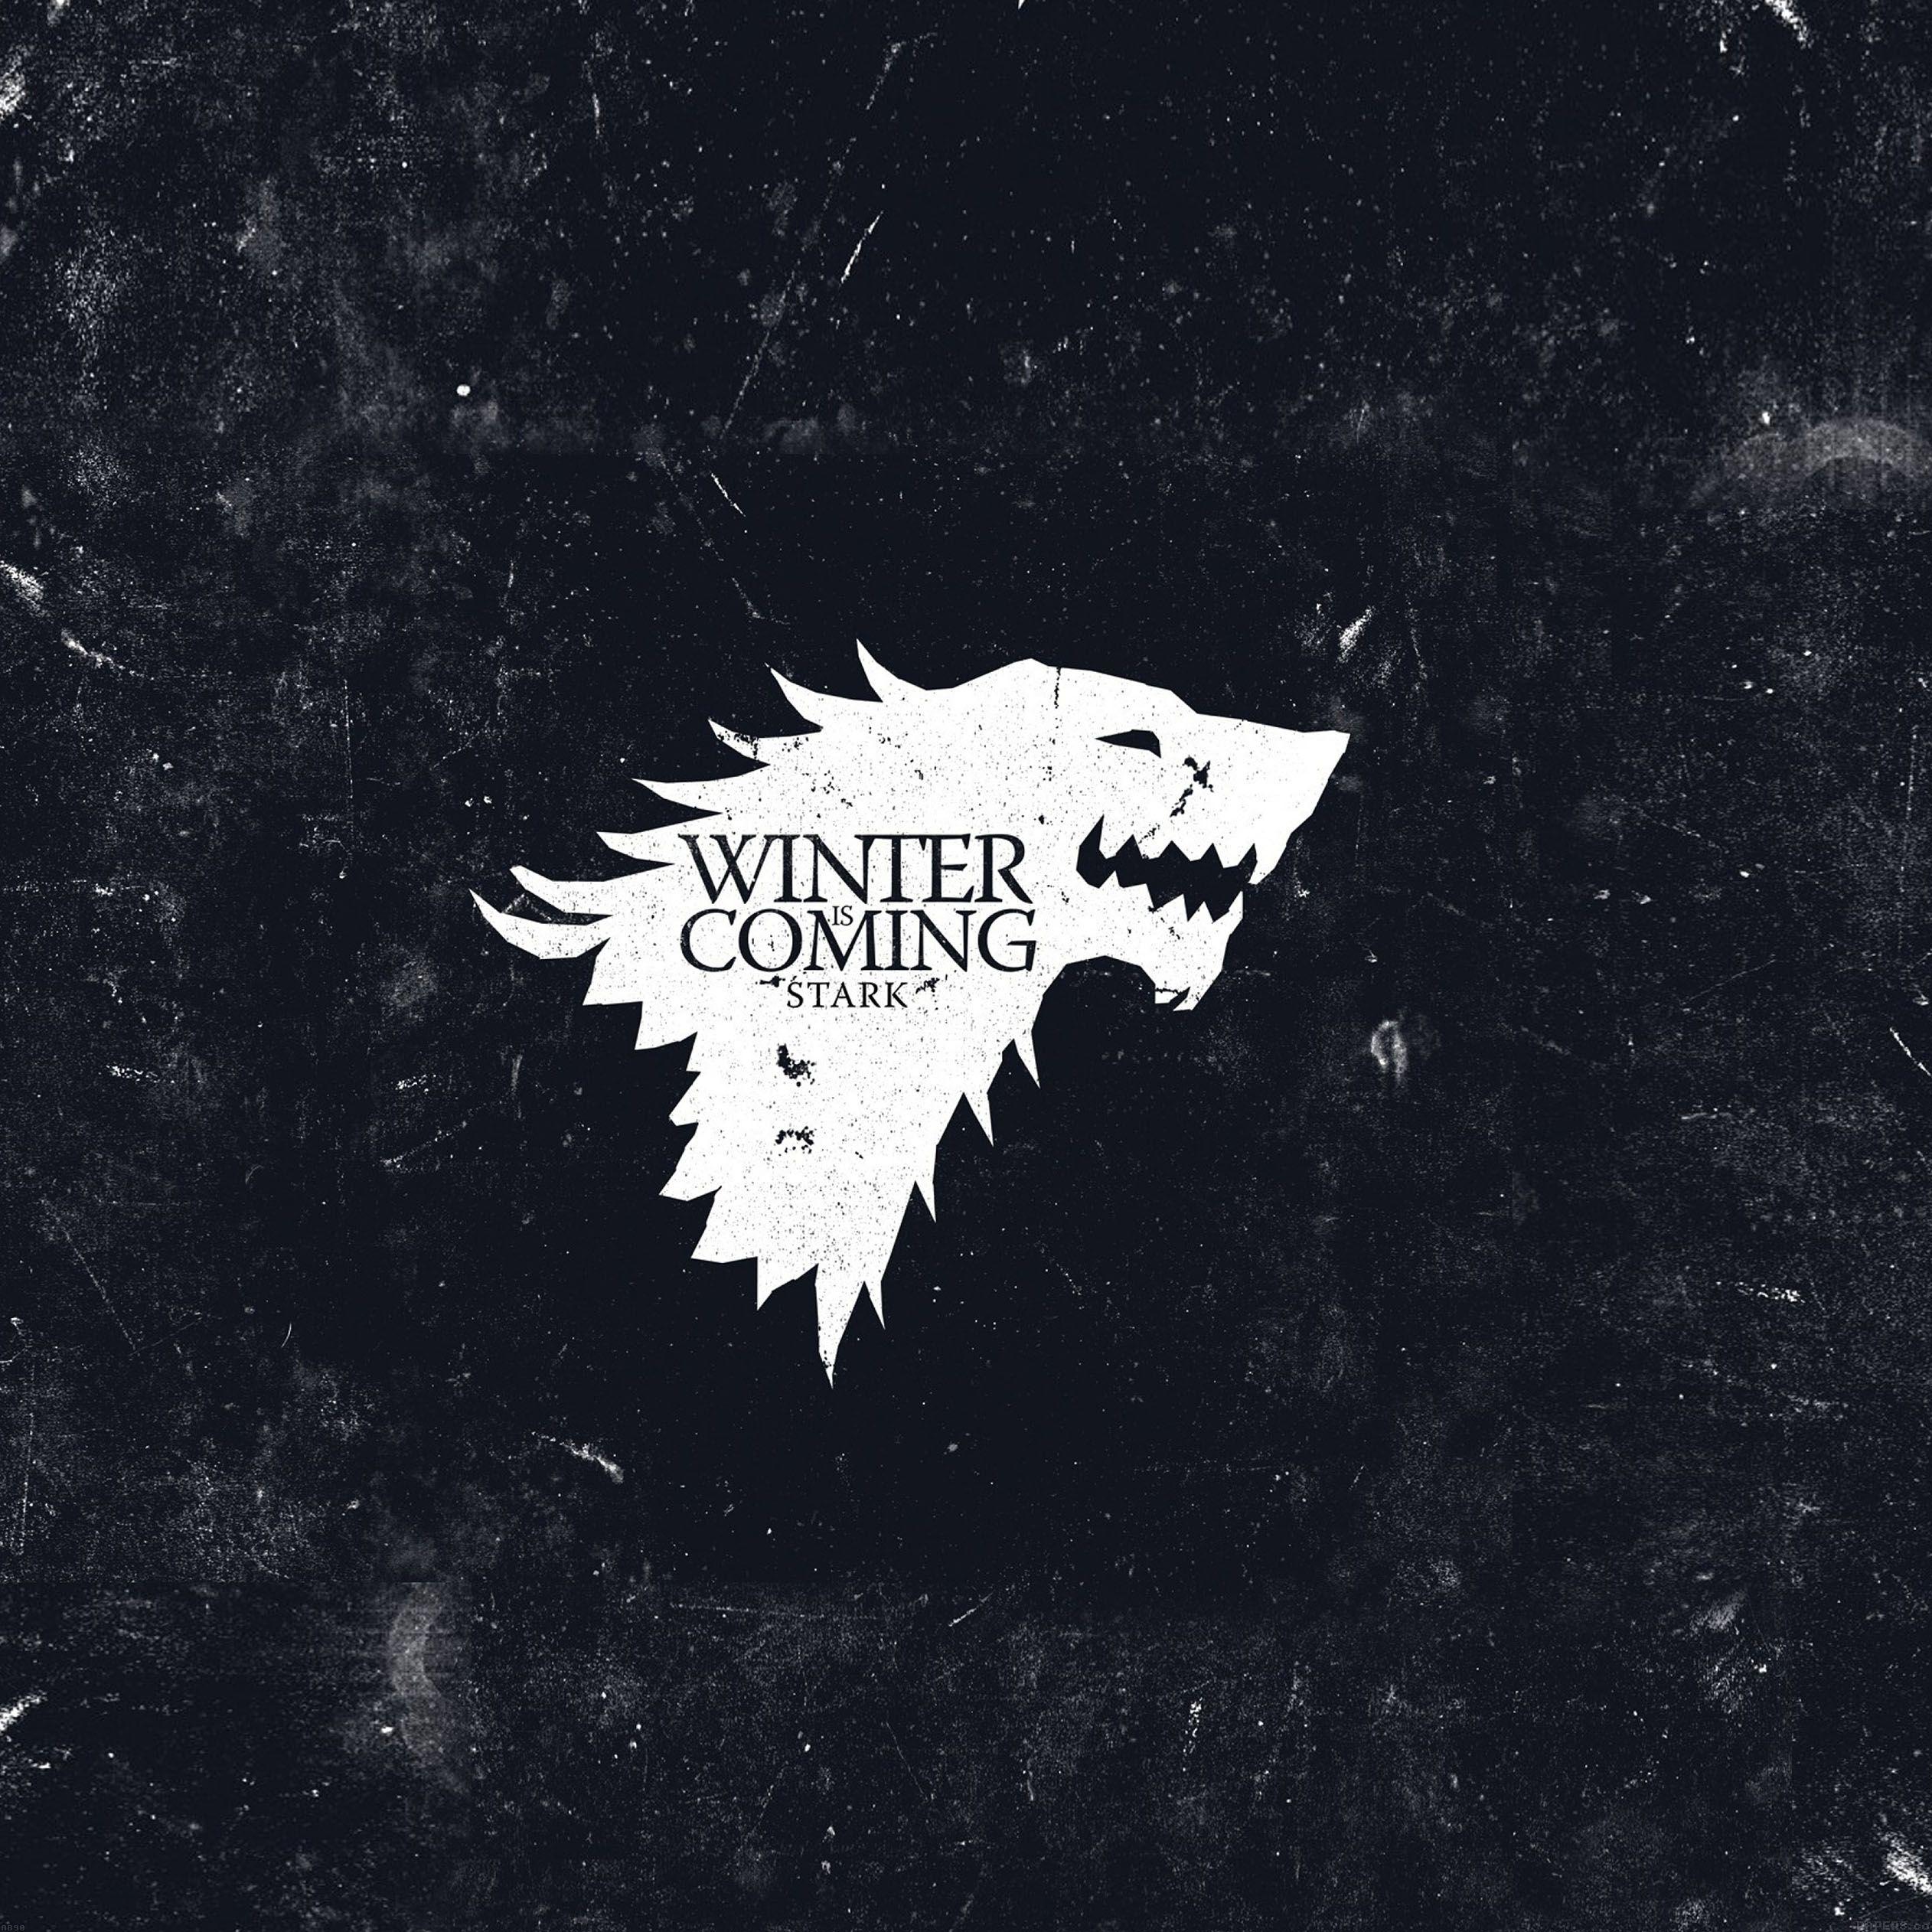 Game of Thrones wallpaper for iPhone